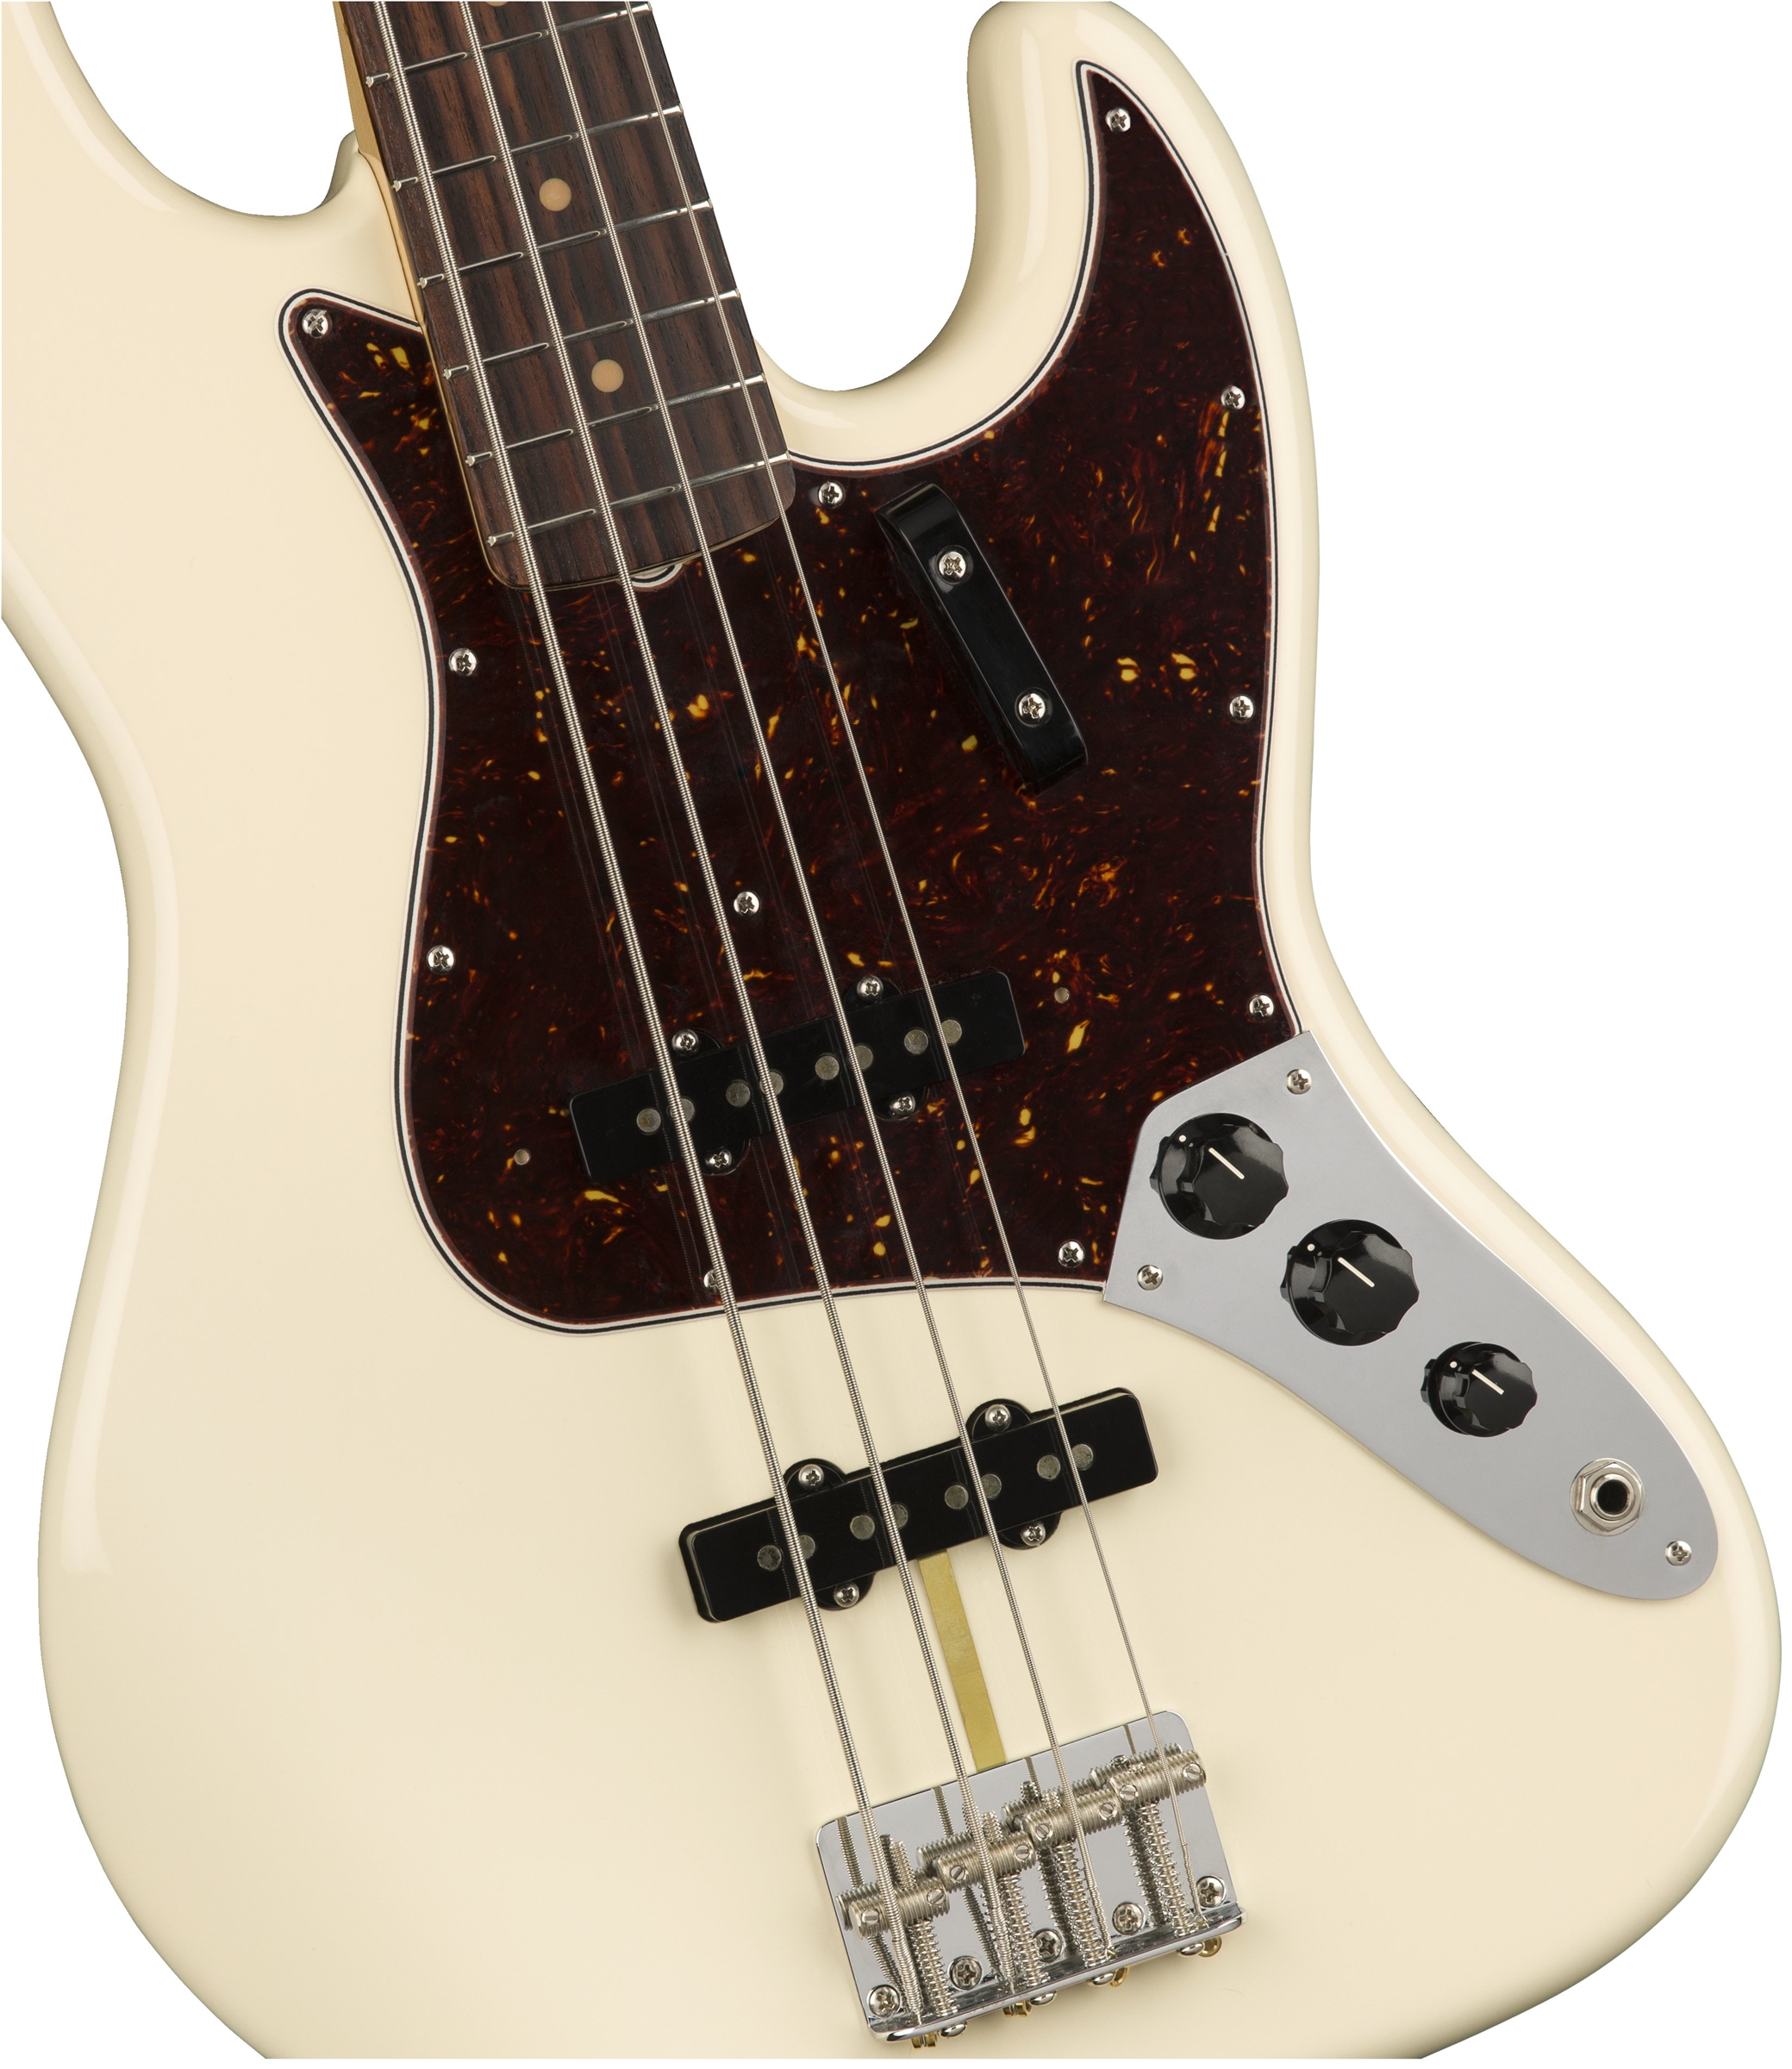 Fender Jazz Bass '60s American Original Usa Rw - Olympic White - Basse Électrique Solid Body - Variation 1